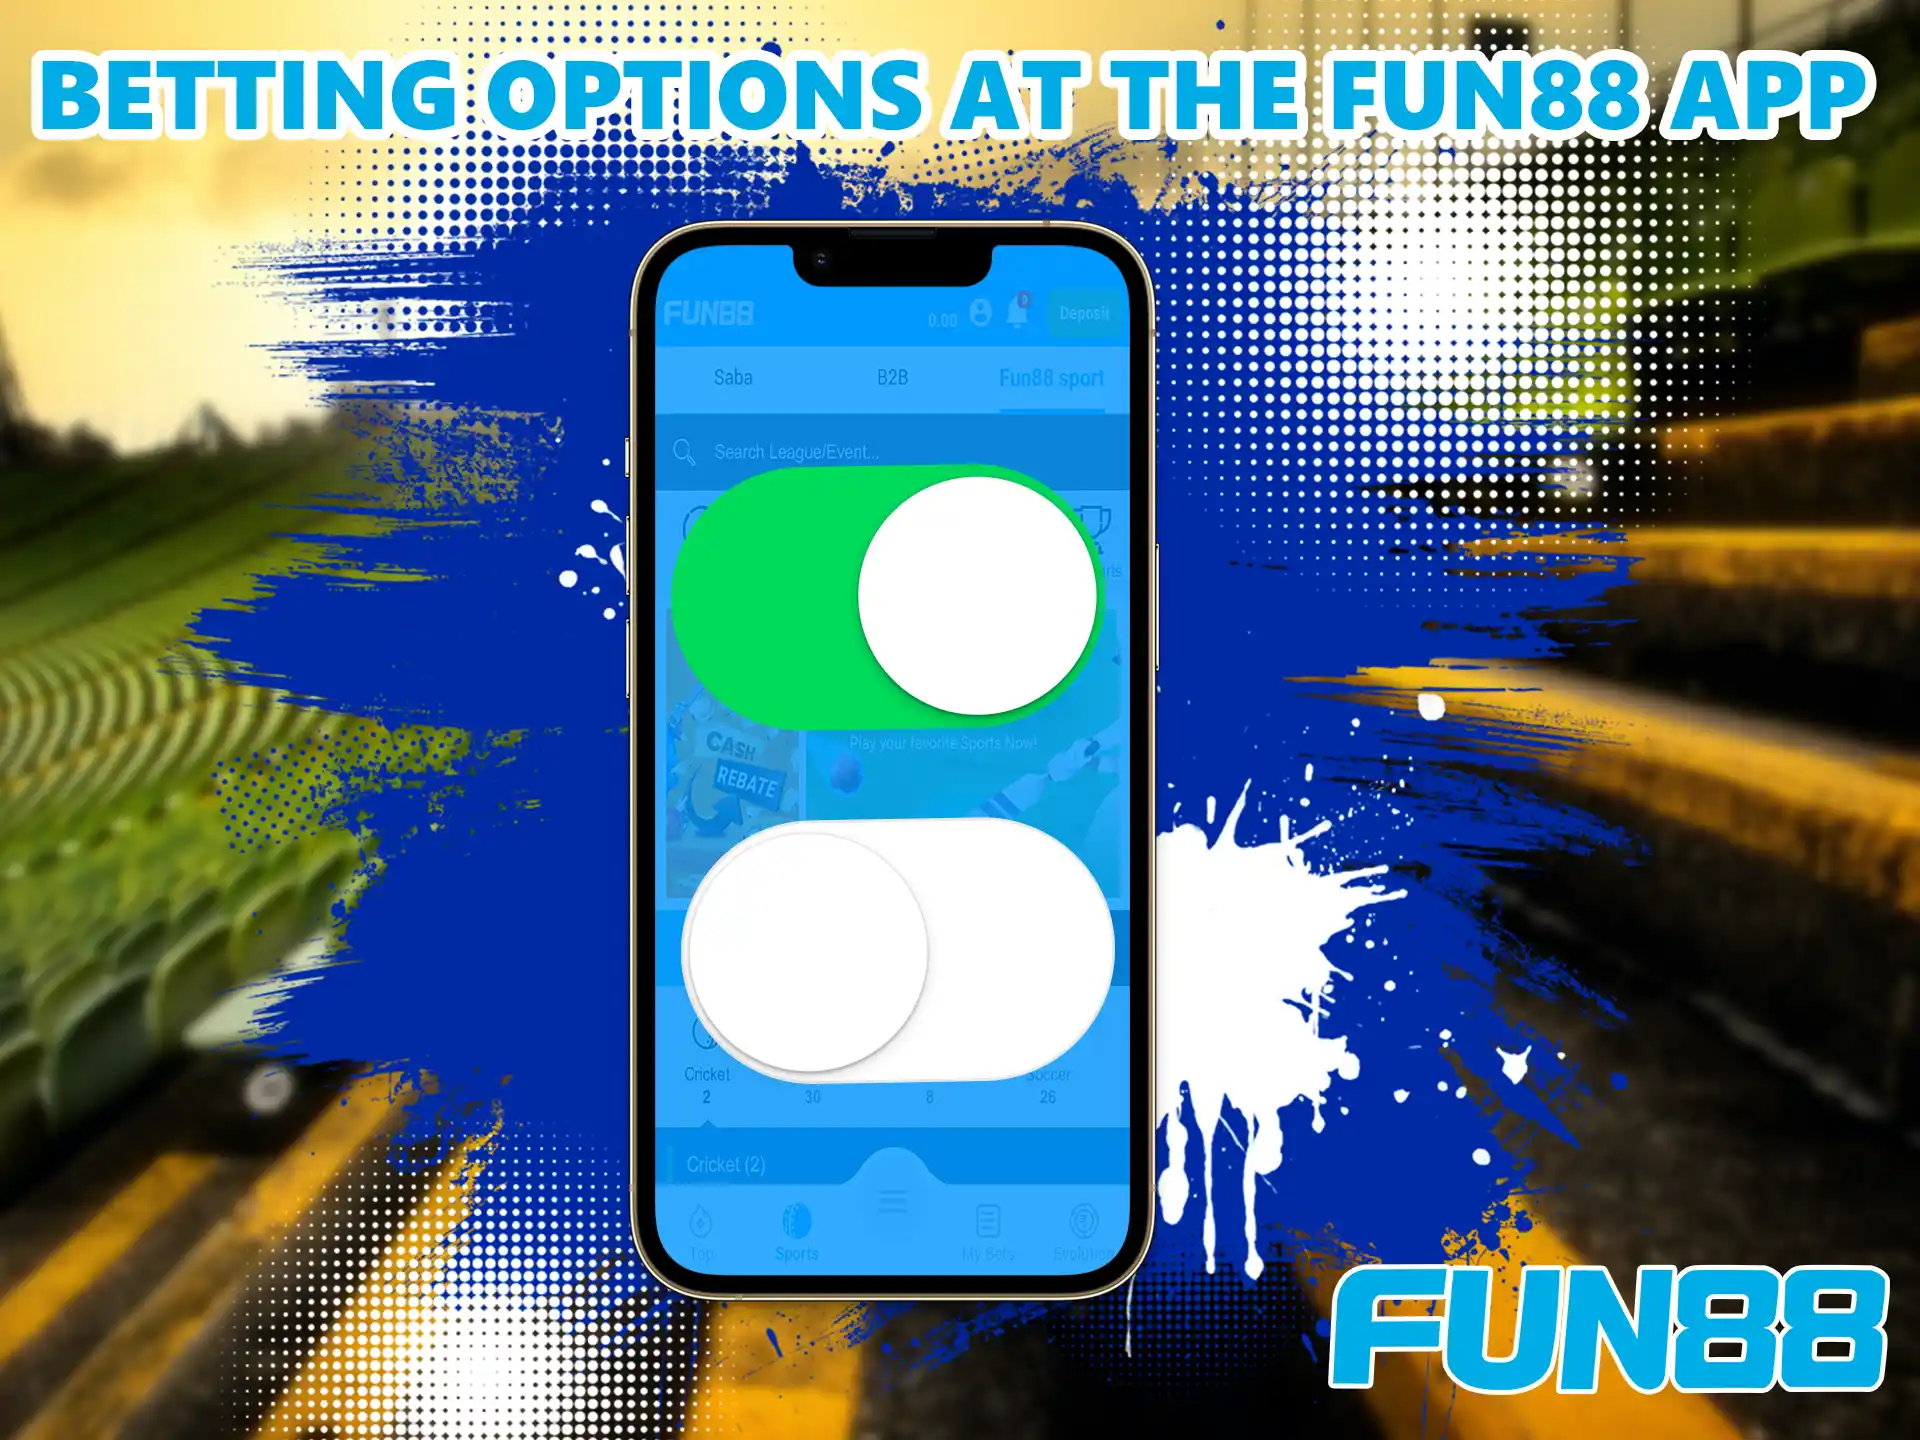 Fun88 App players are given a choice of three betting options to keep players from getting bored.